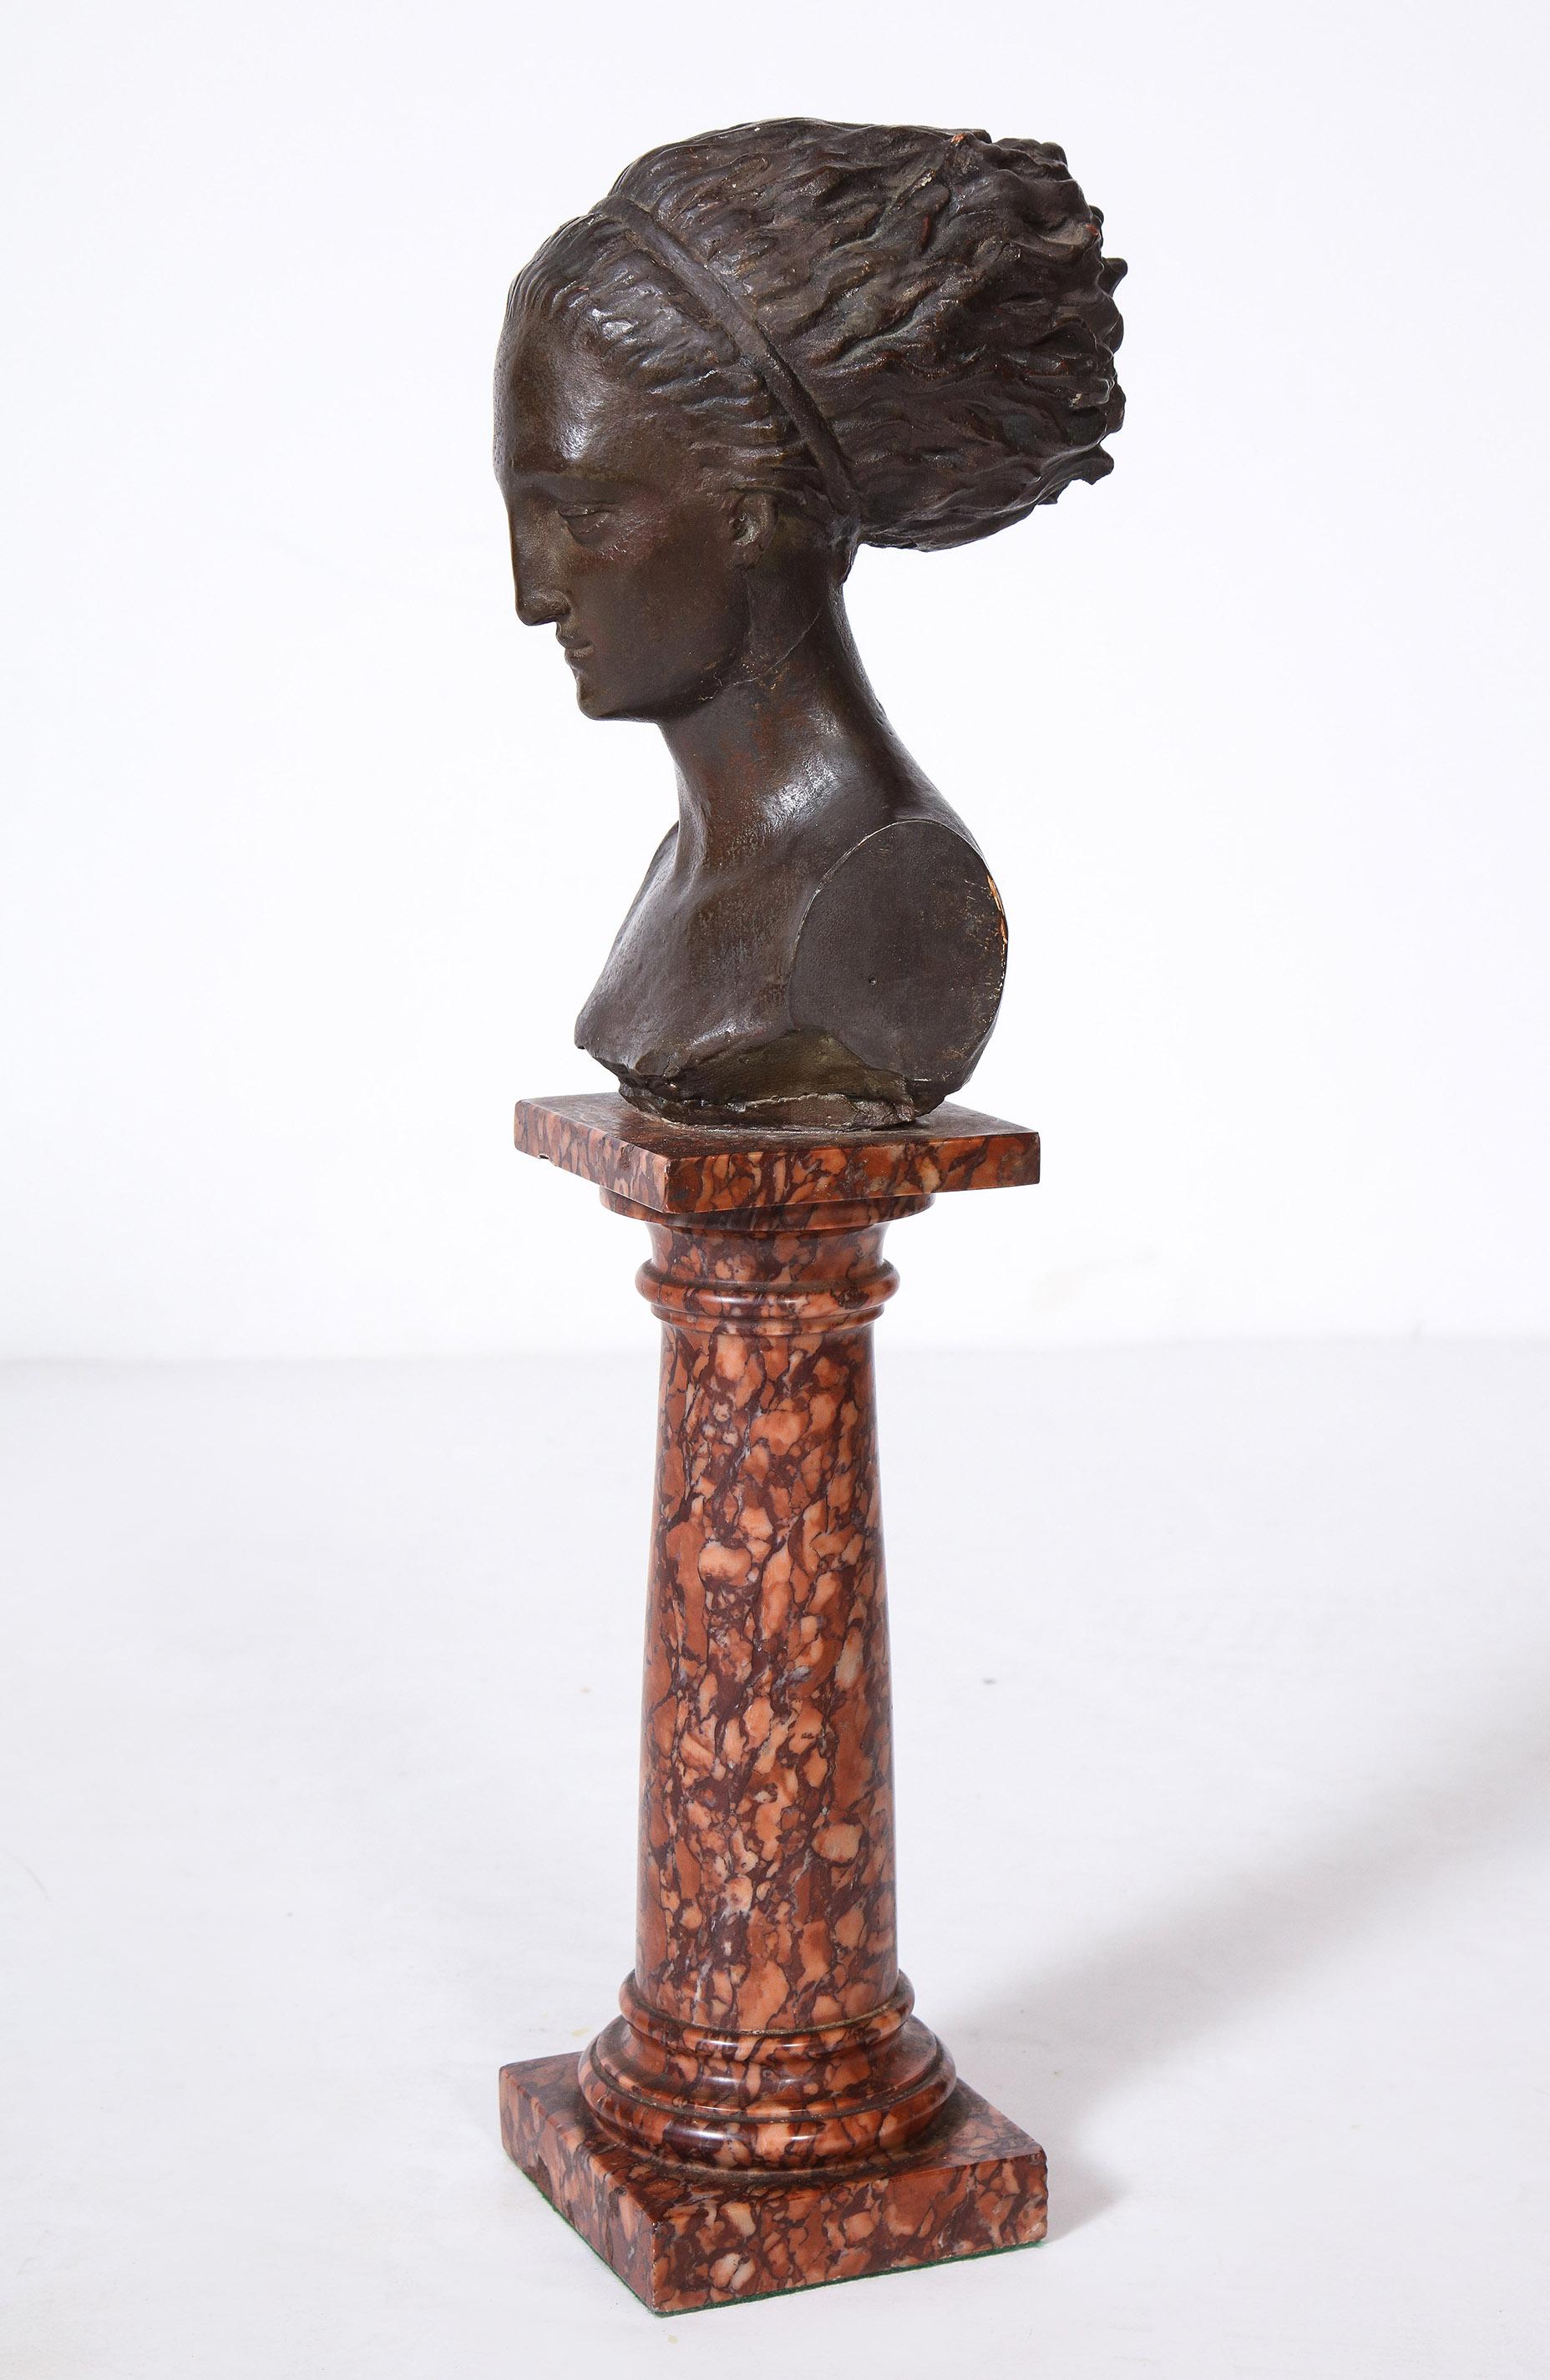 Cast Gesso Bust of a Classical Roman Woman

The cast gesso bust patinated to appear bronze mounted on a Rosso Brocatelle column form base.